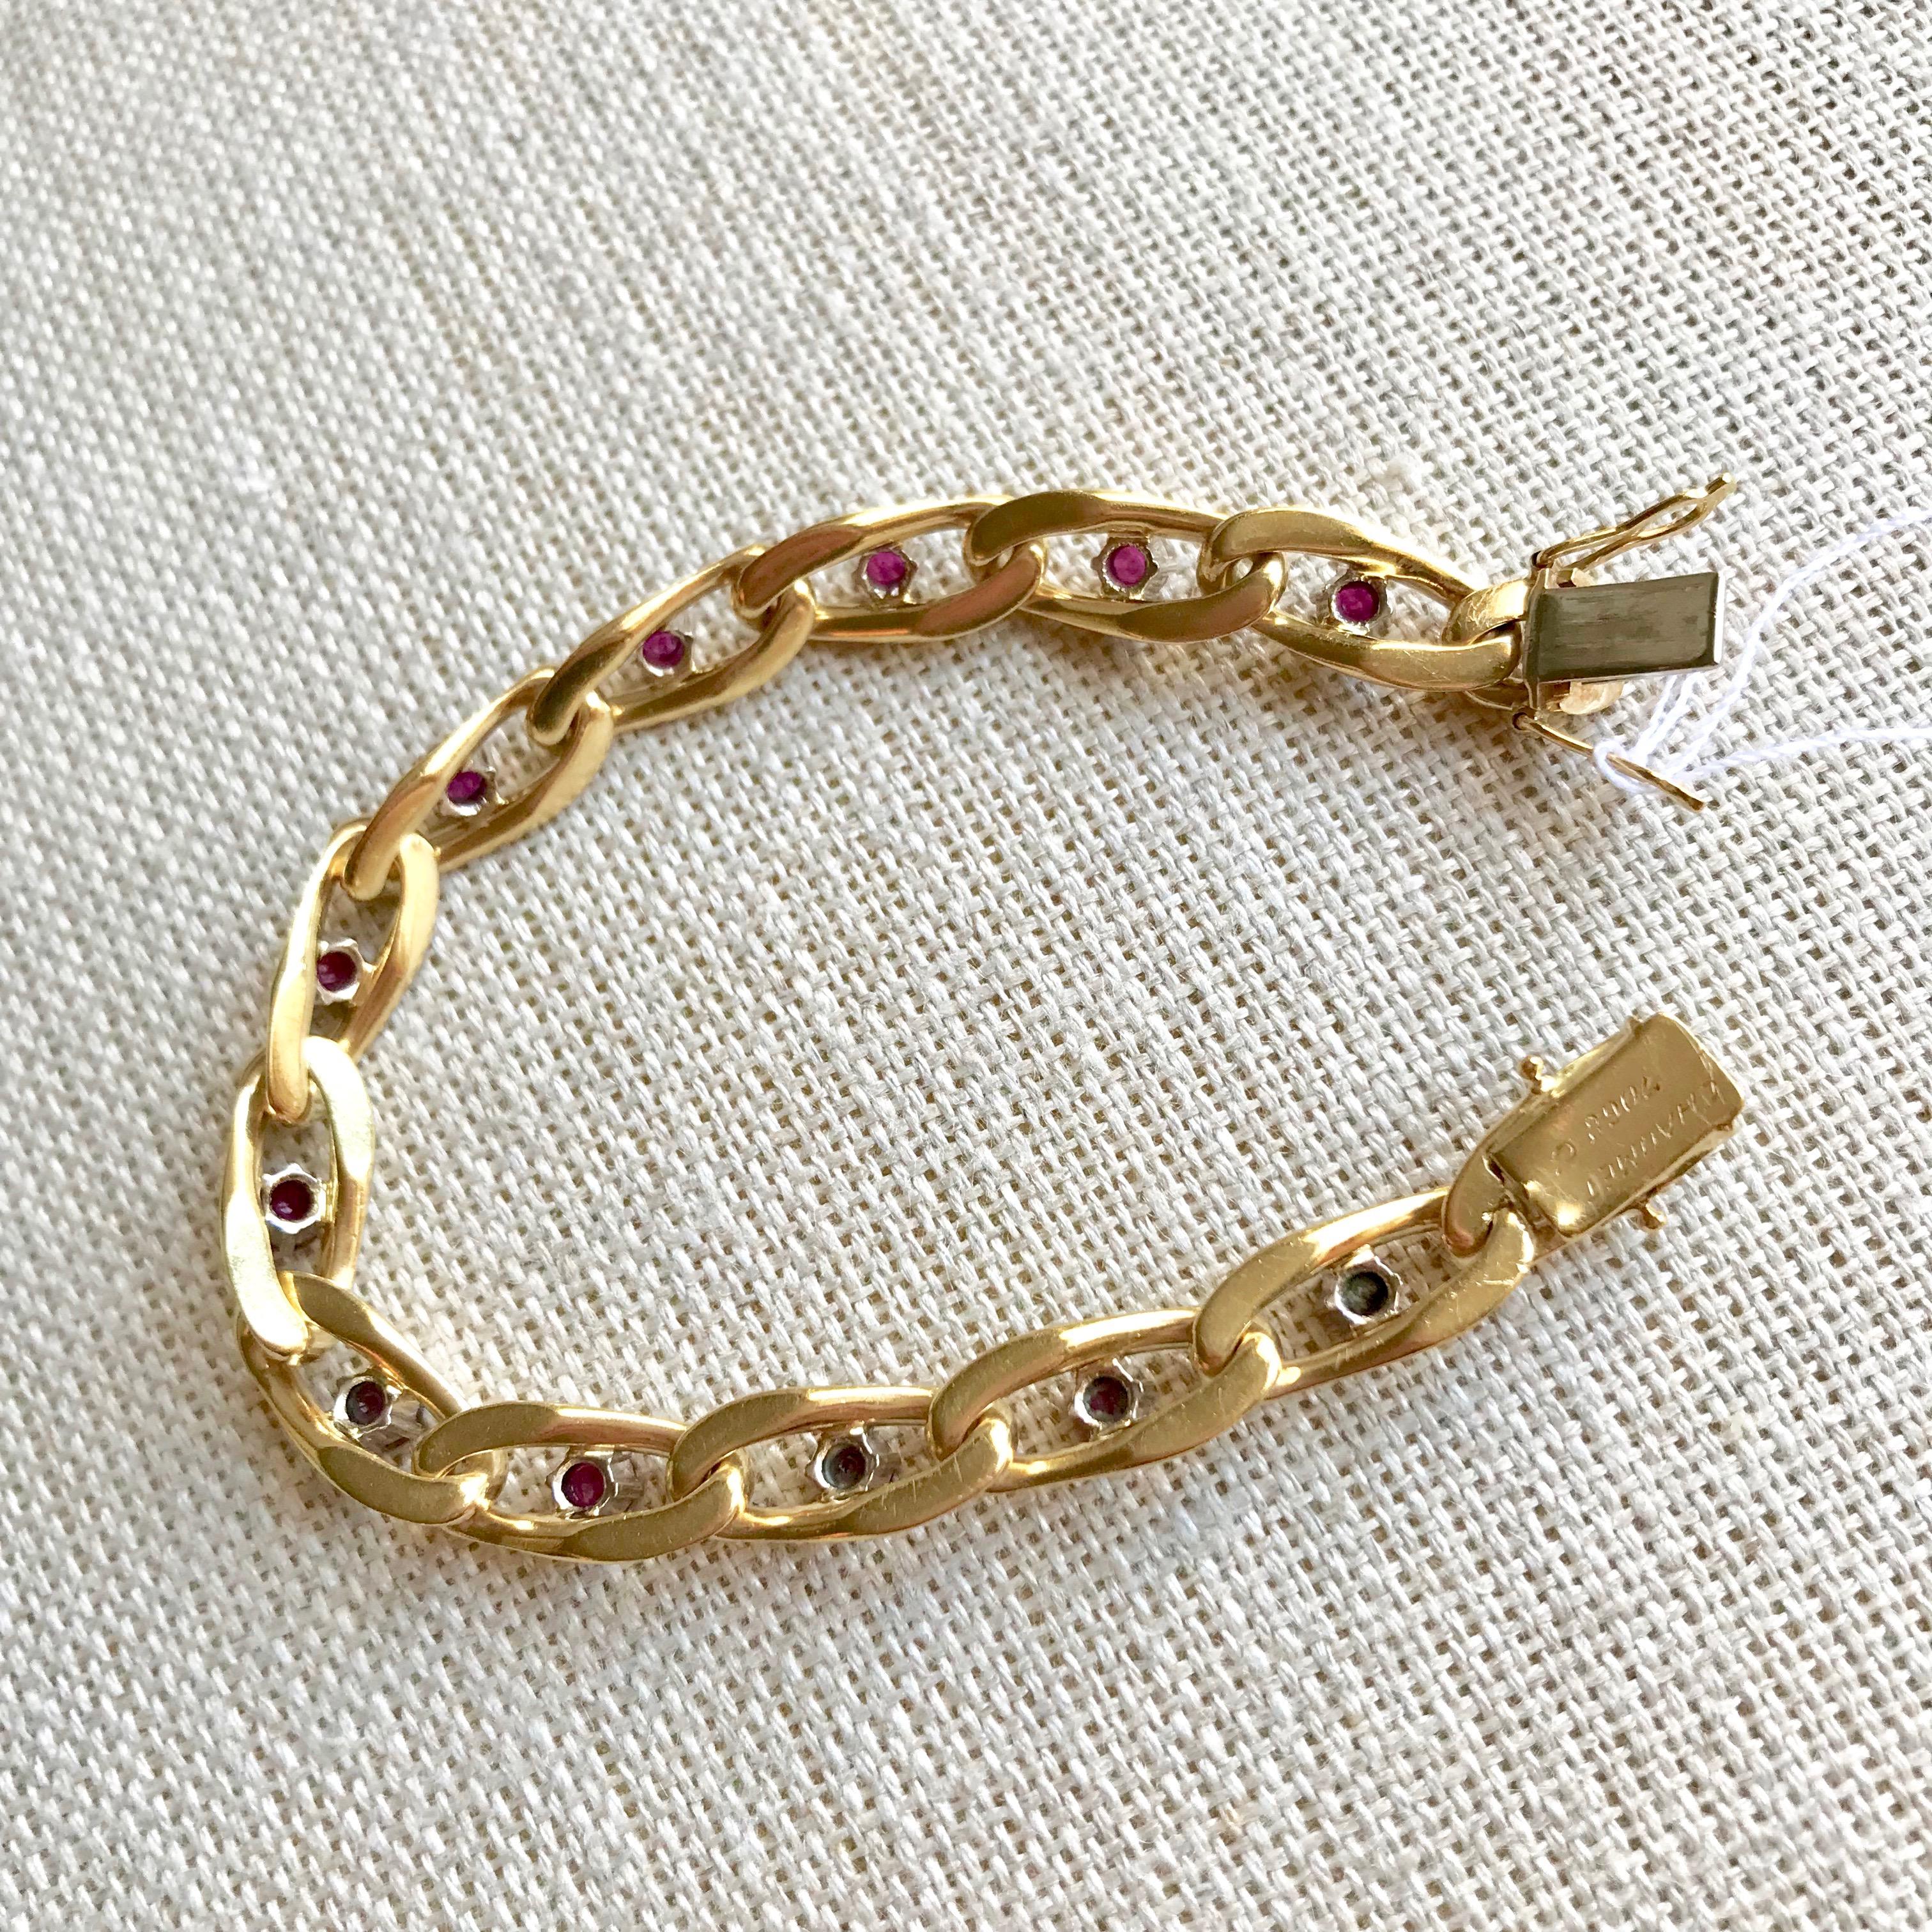 Chaumet 18 Karat Yellow Gold and Ruby Bracelet For Sale 3